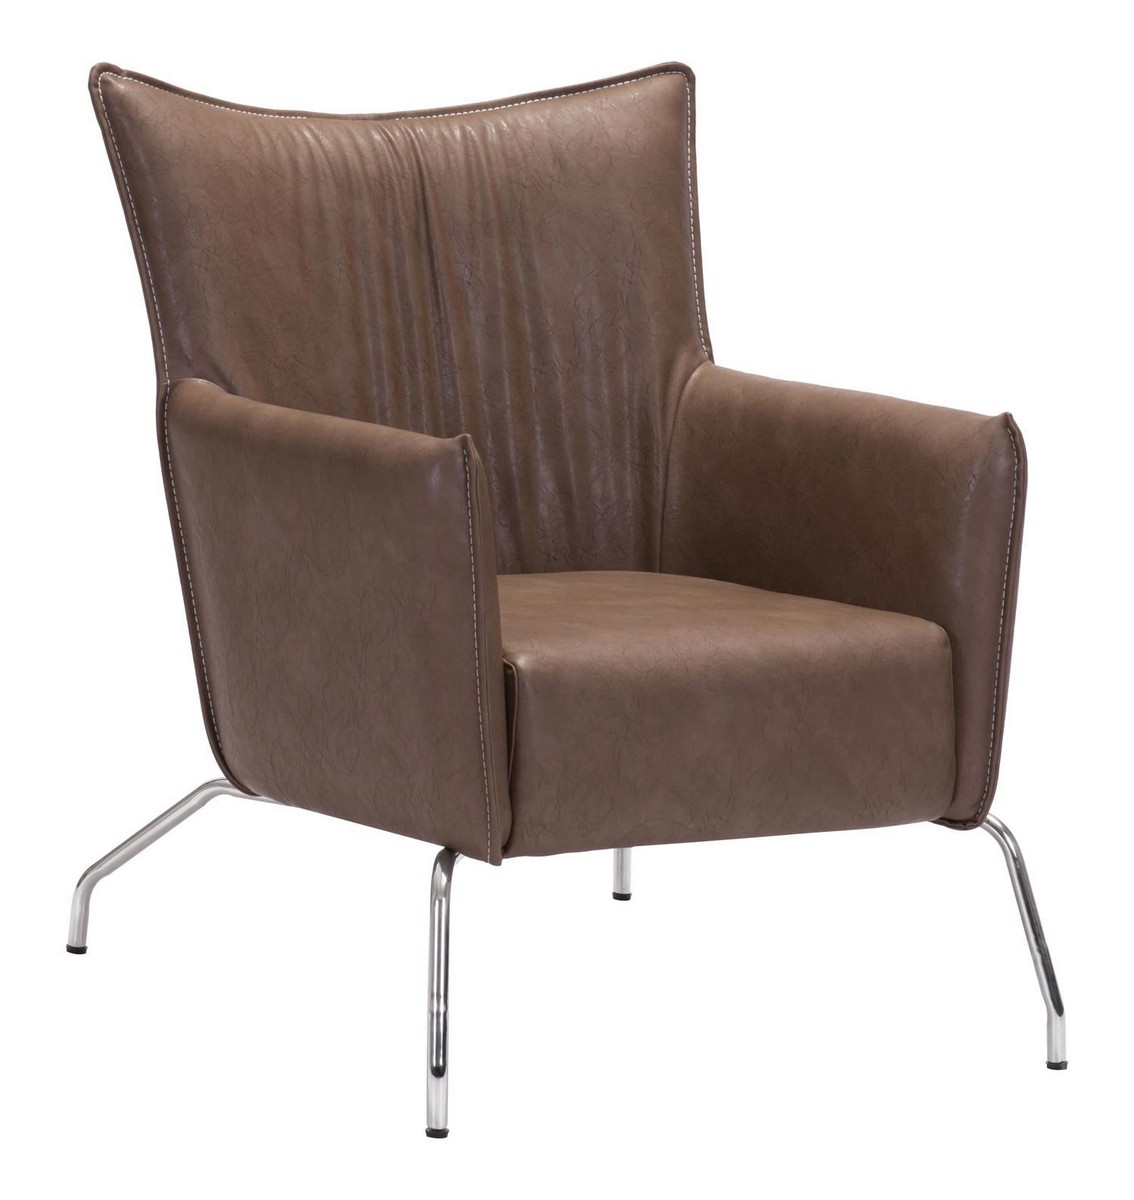 Zuo Modern Ostend Occasional Chair - Saddle Brown